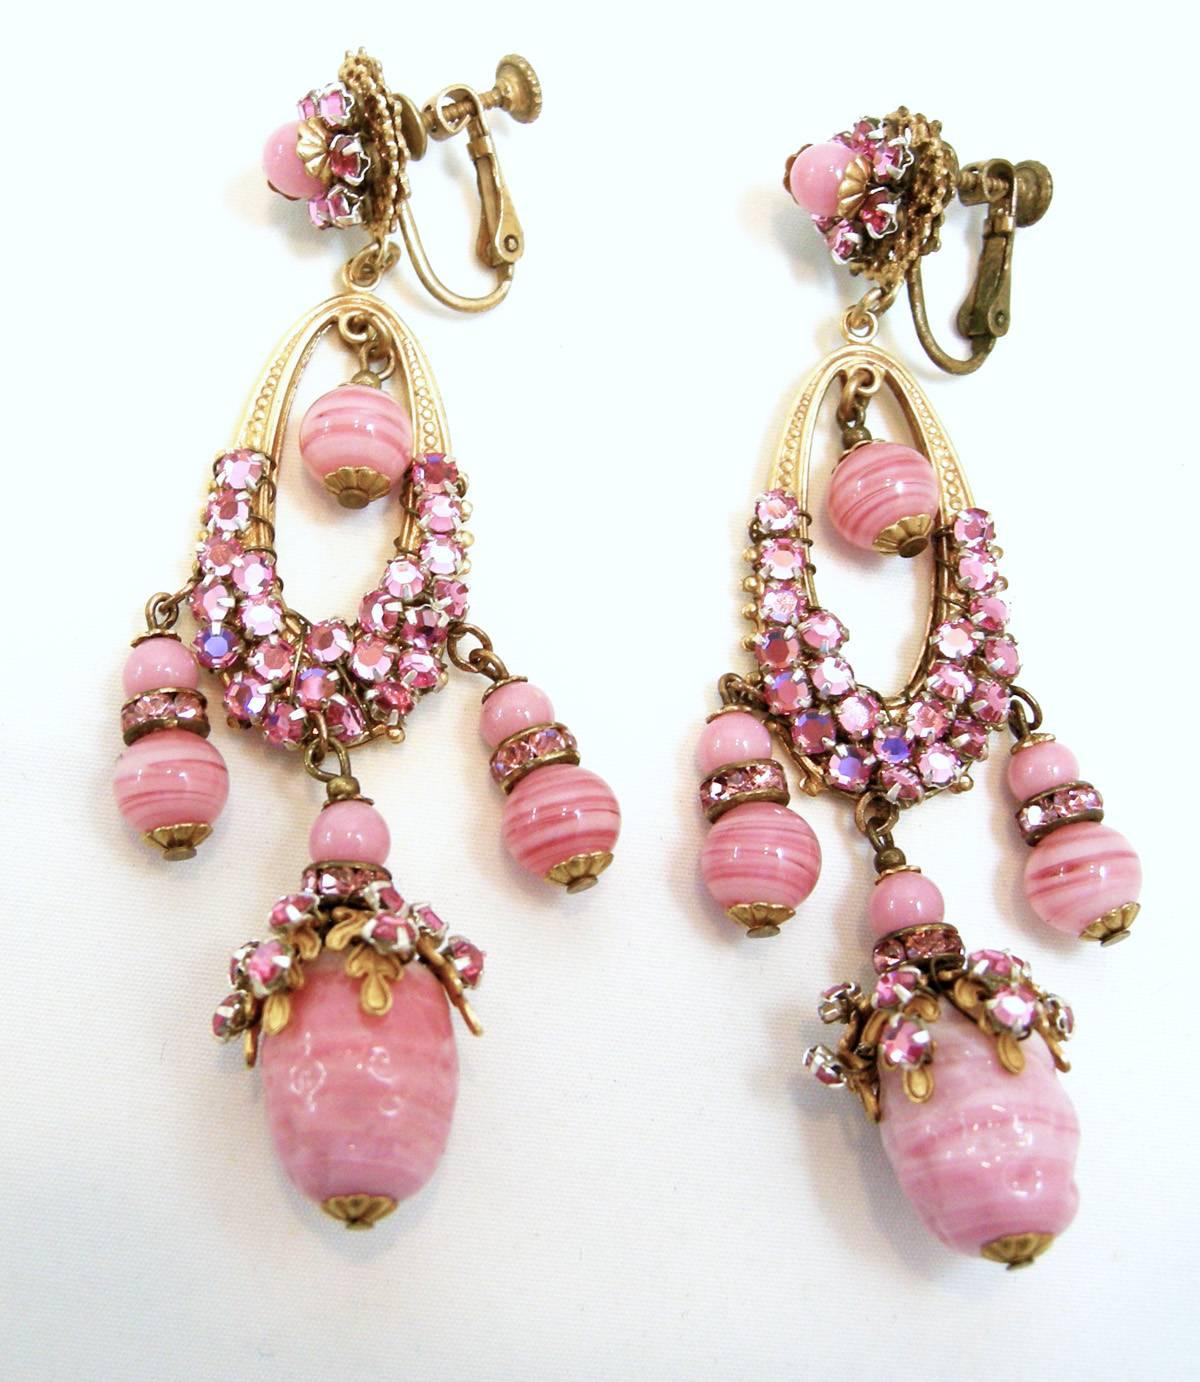 These magnificent Haskell earrings are so rare to find in such fantastic condition. Haskell was famous for her intricately designed jewelry and these earrings are a perfect example. They are long duster earrings with French molded pink glass